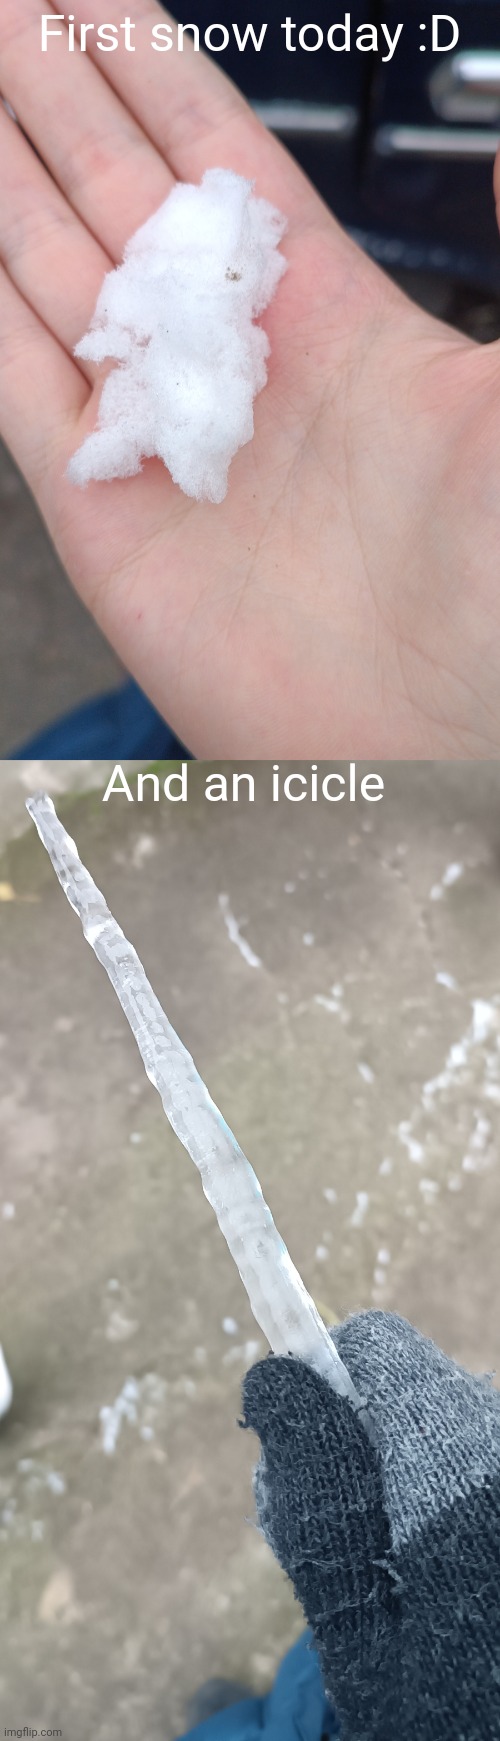 High Quality First snow today :D; And an icicle Blank Meme Template